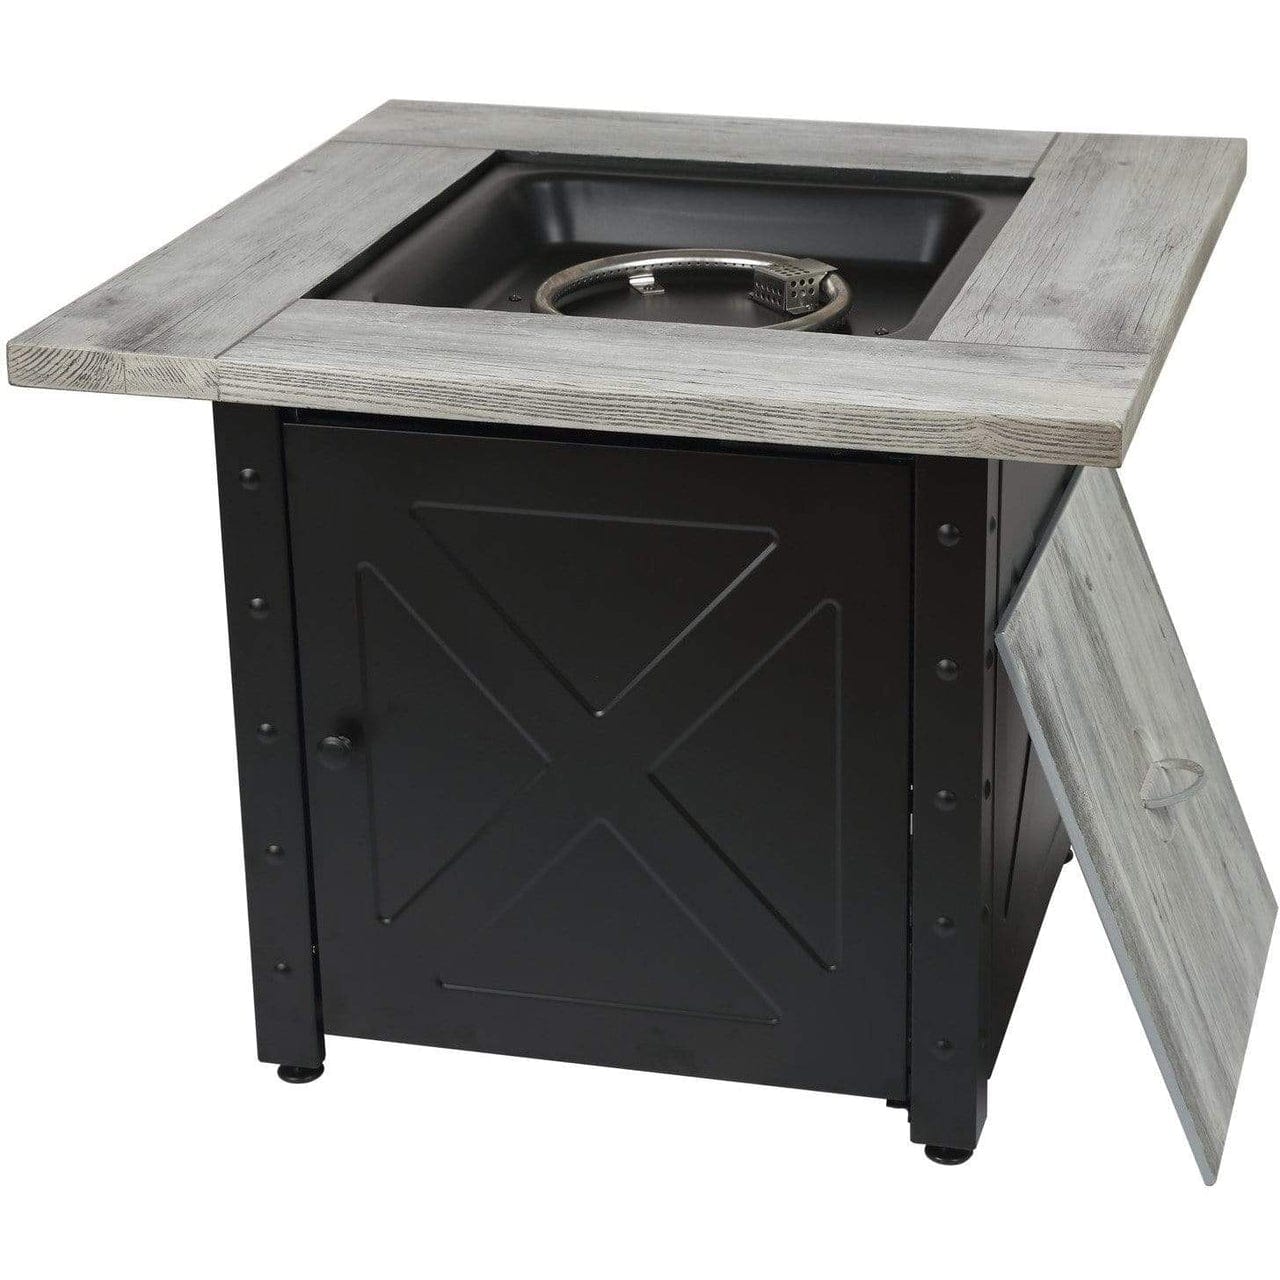 StarWood Fireplaces - Endless Summer The Mason LP Gas Outdoor Fire Pit -